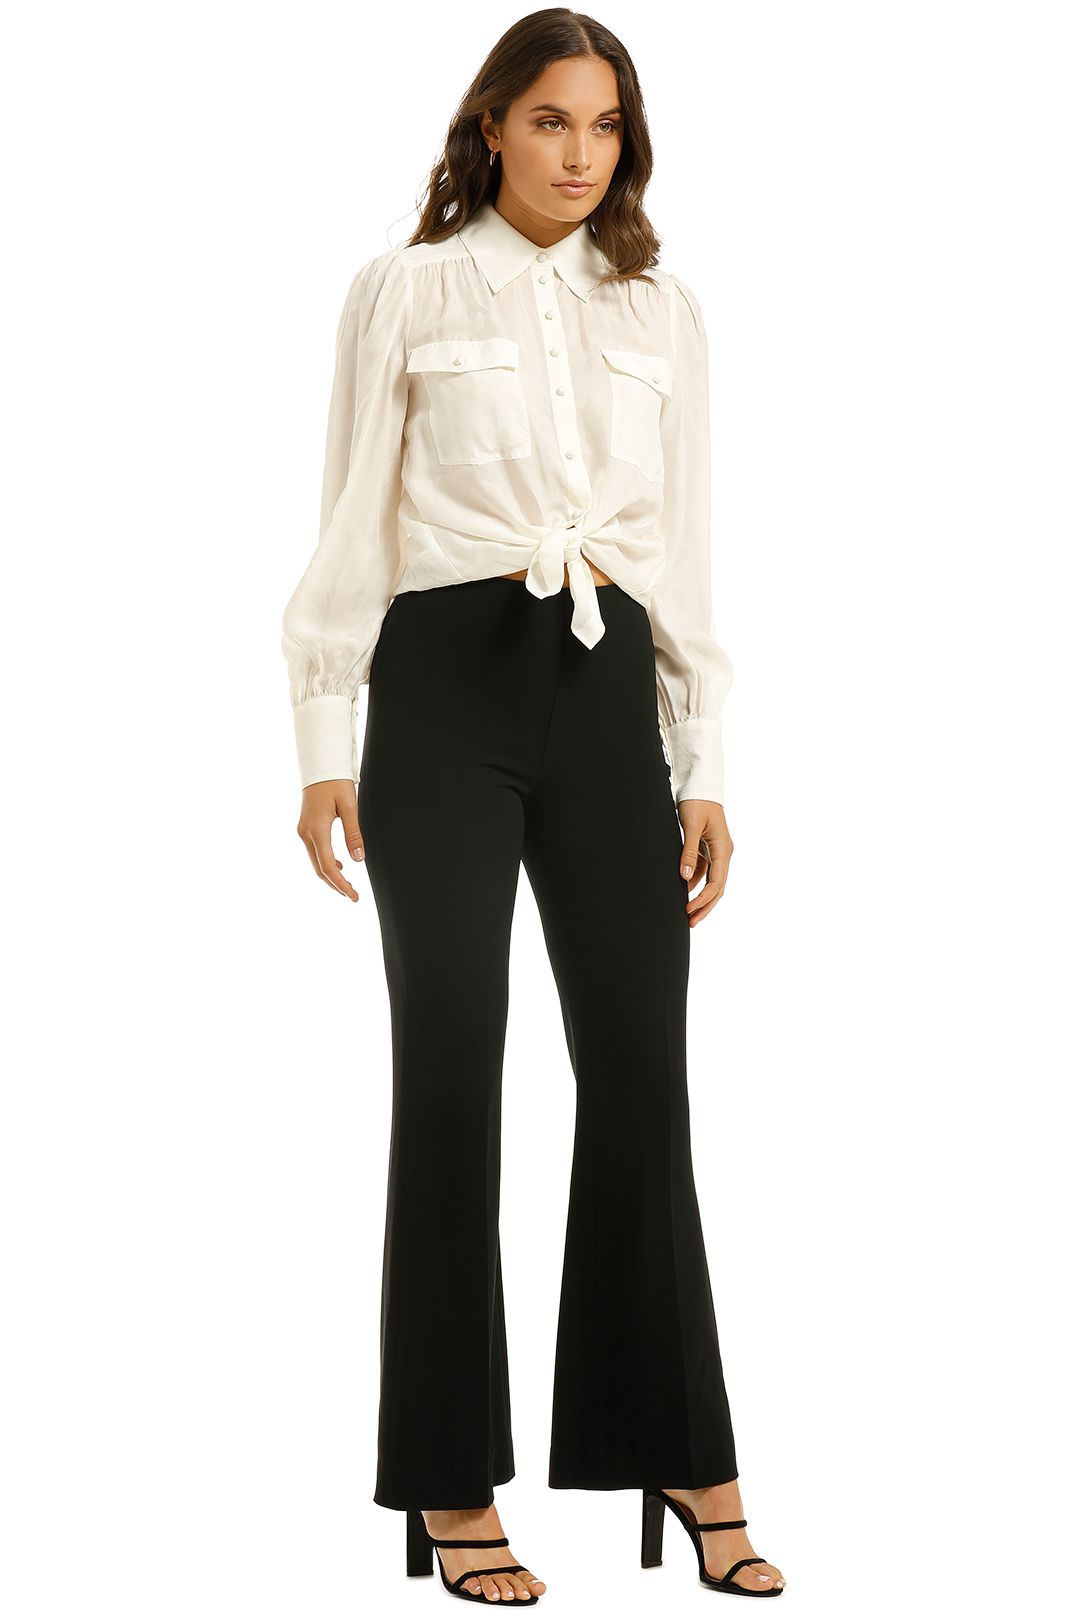 Country-Road-High-Waist-Flare-Pant-Black-Side